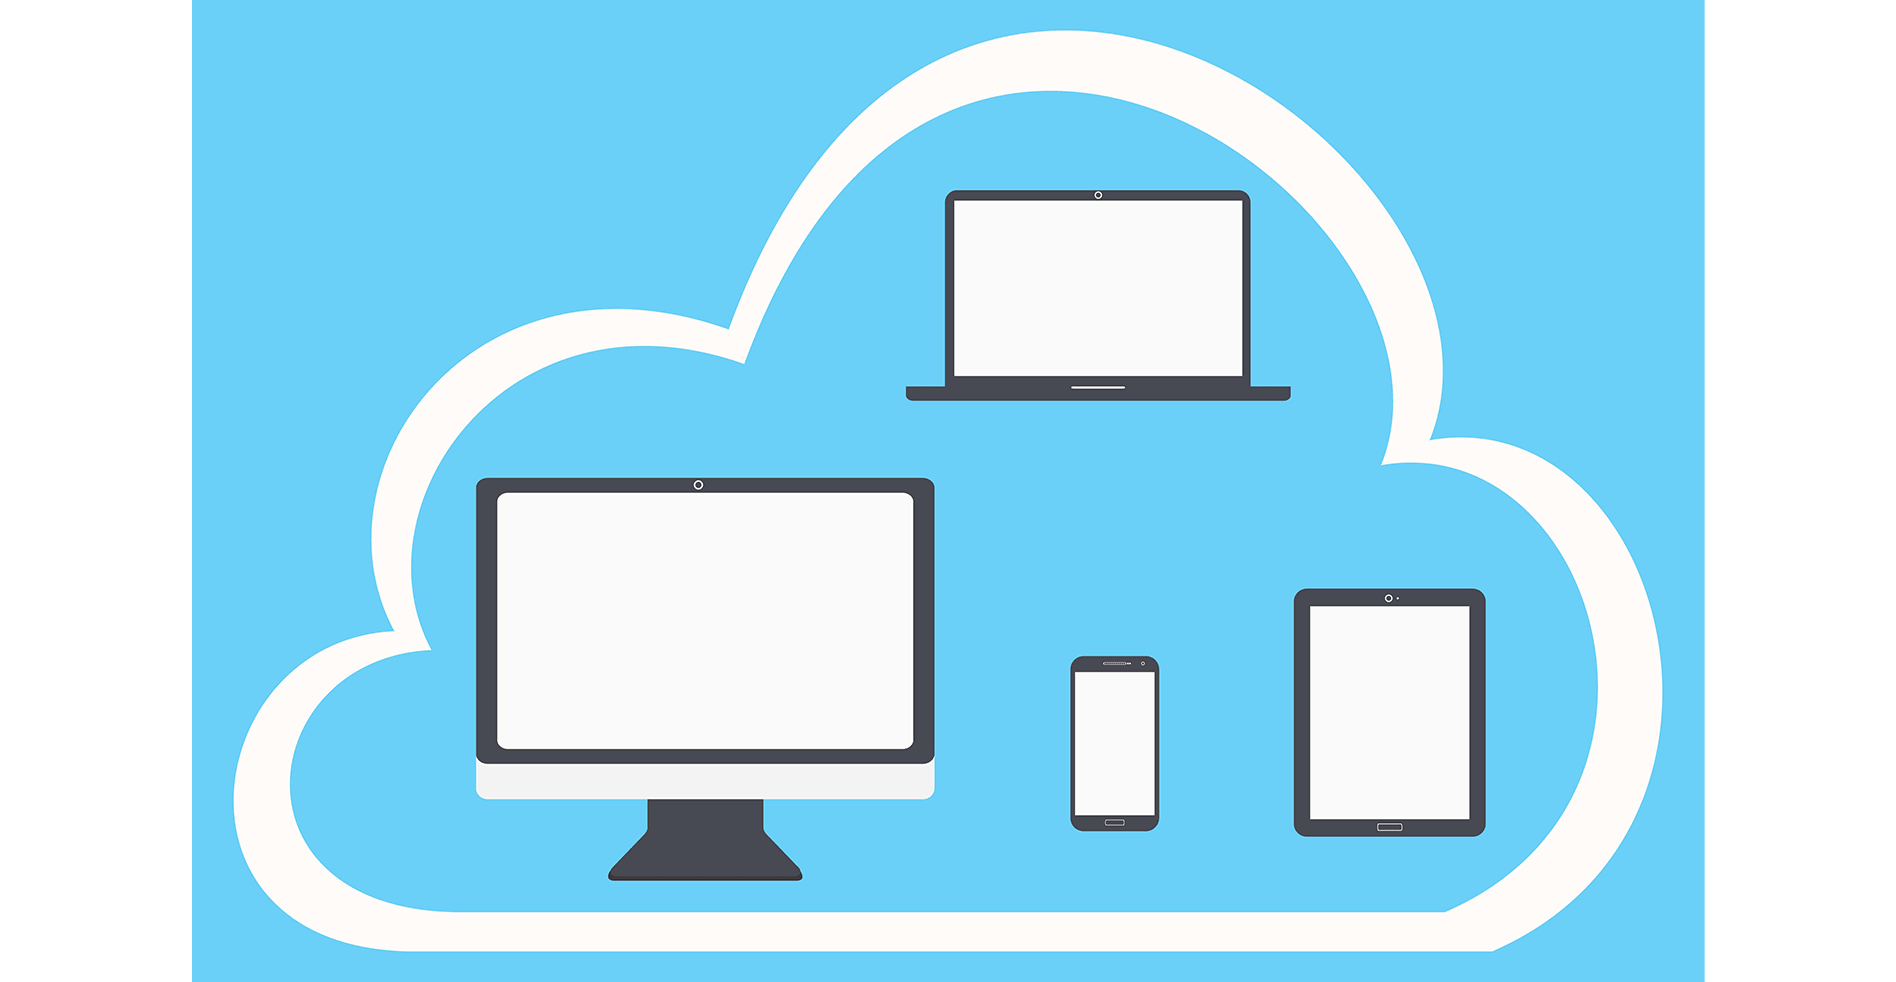 visual representation of the cloud between different devices